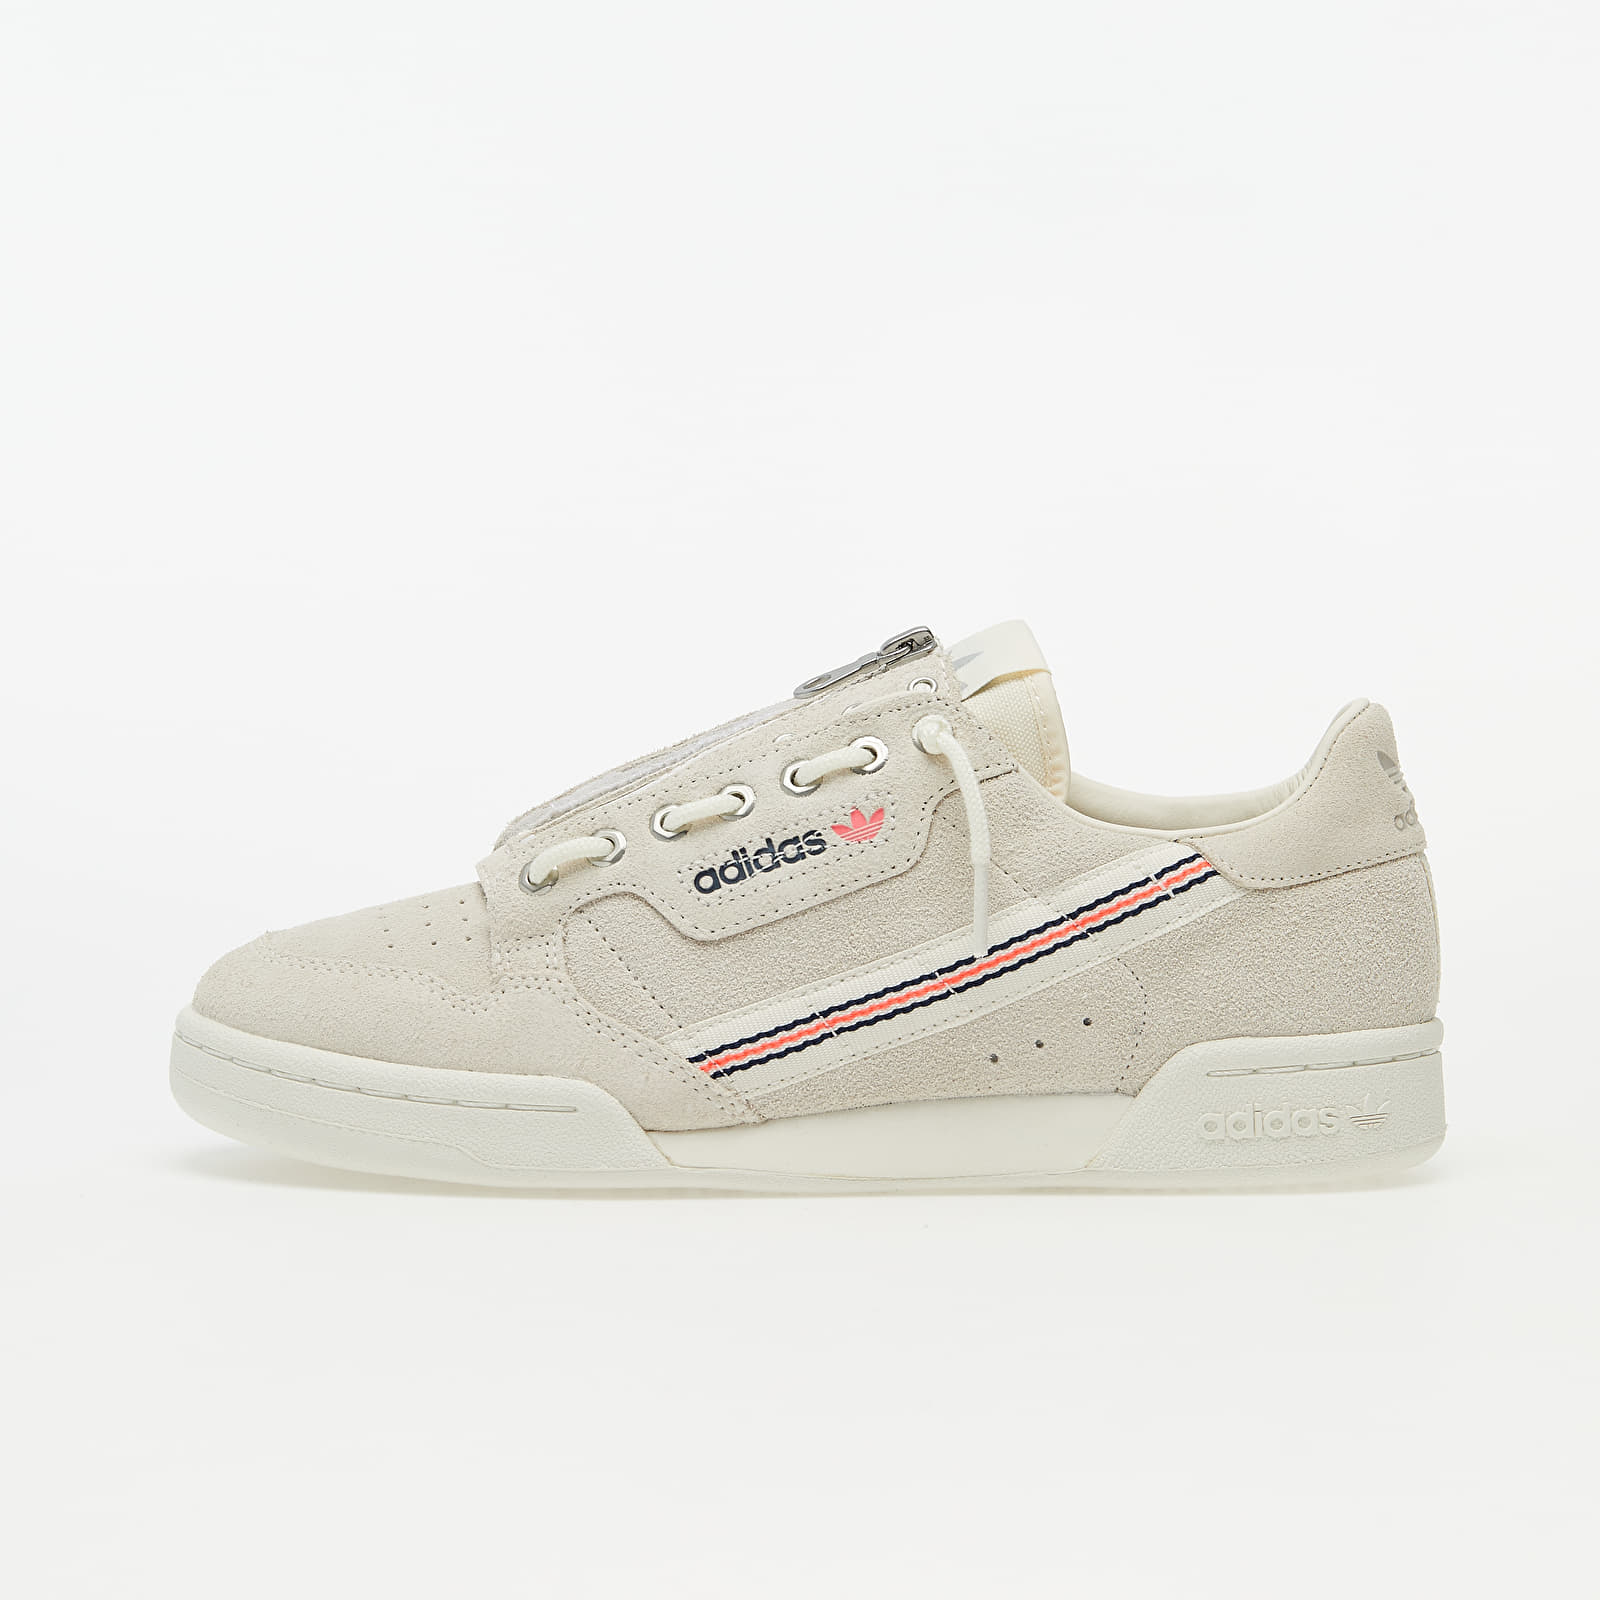 Pánske tenisky a topánky adidas Continental 80 Core White/ Core White/ Off White